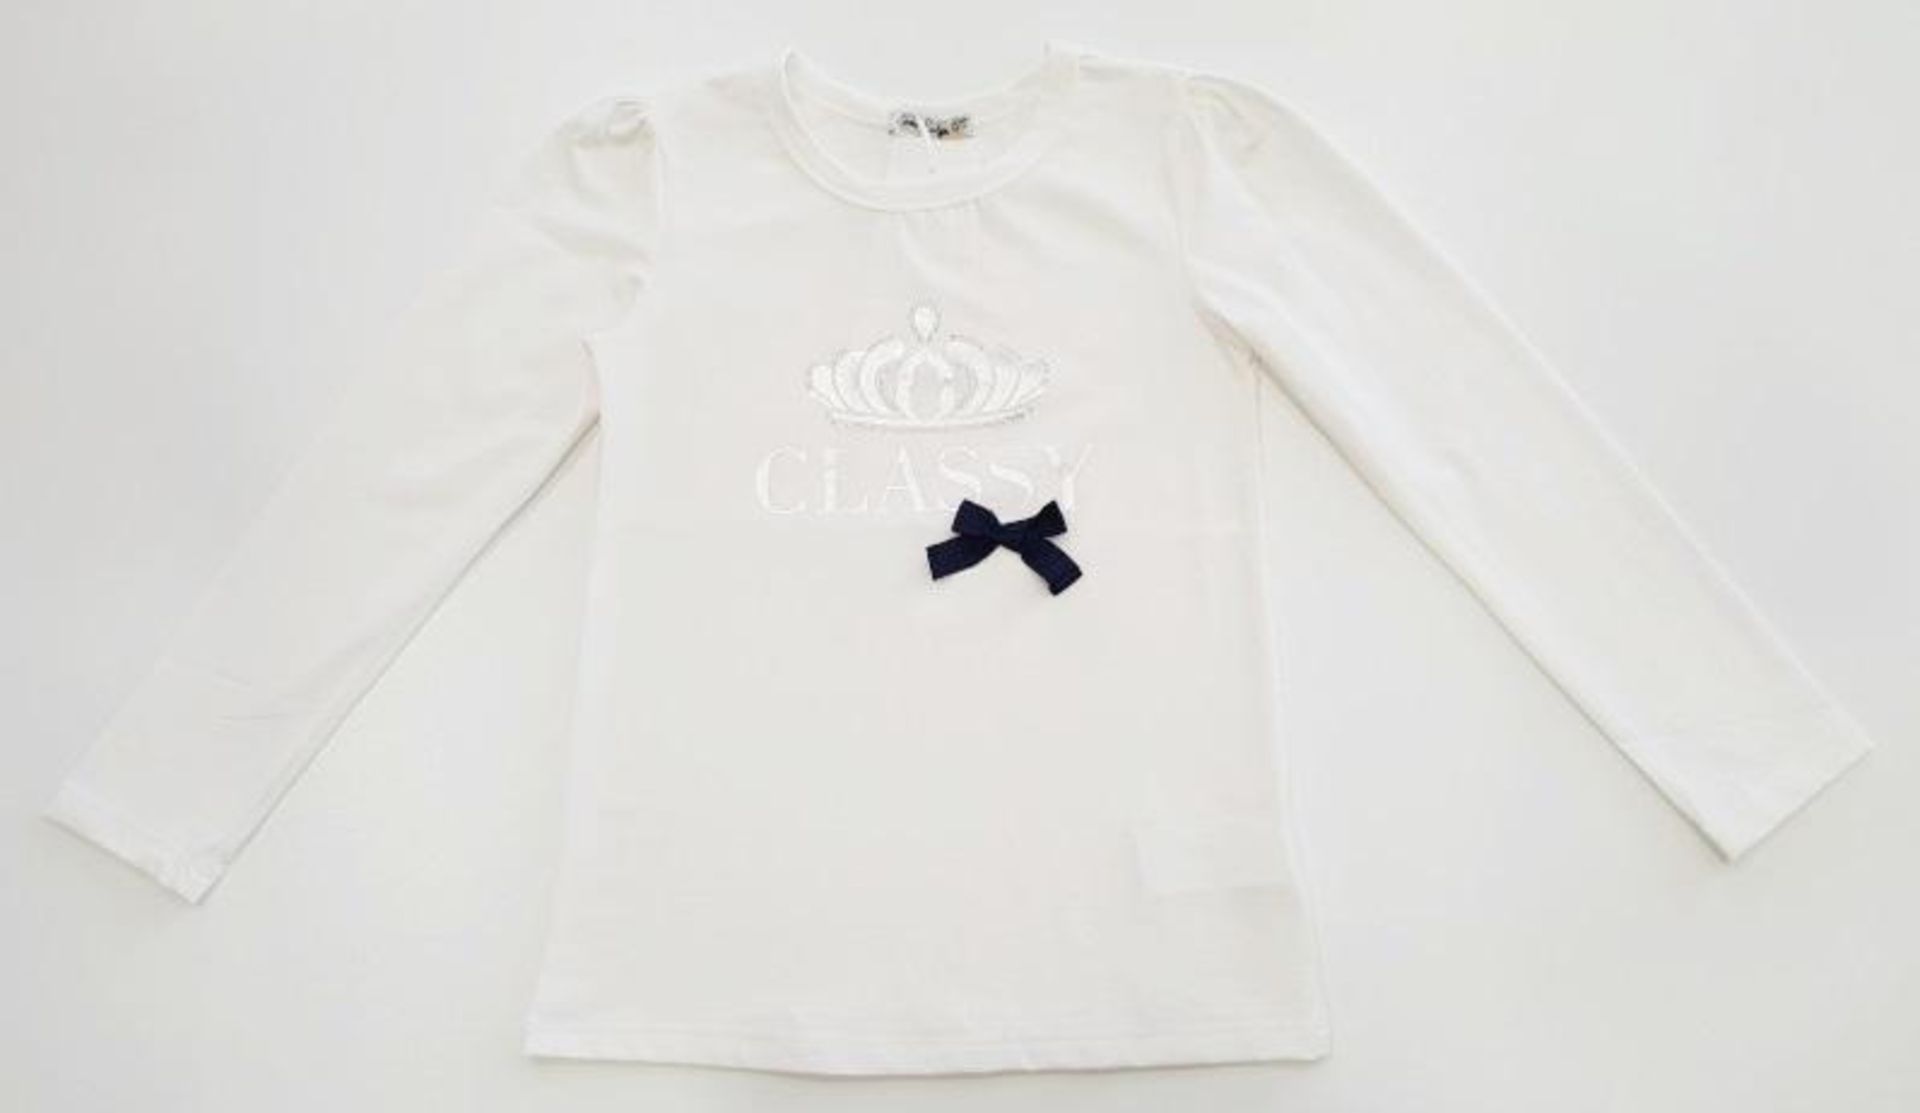 1 x LITTLE LADY T-Shirt L/Sleeve "Classy" - New With Tags - Size: 6A - Ref: SSCCLA07A - CL580 - NO V